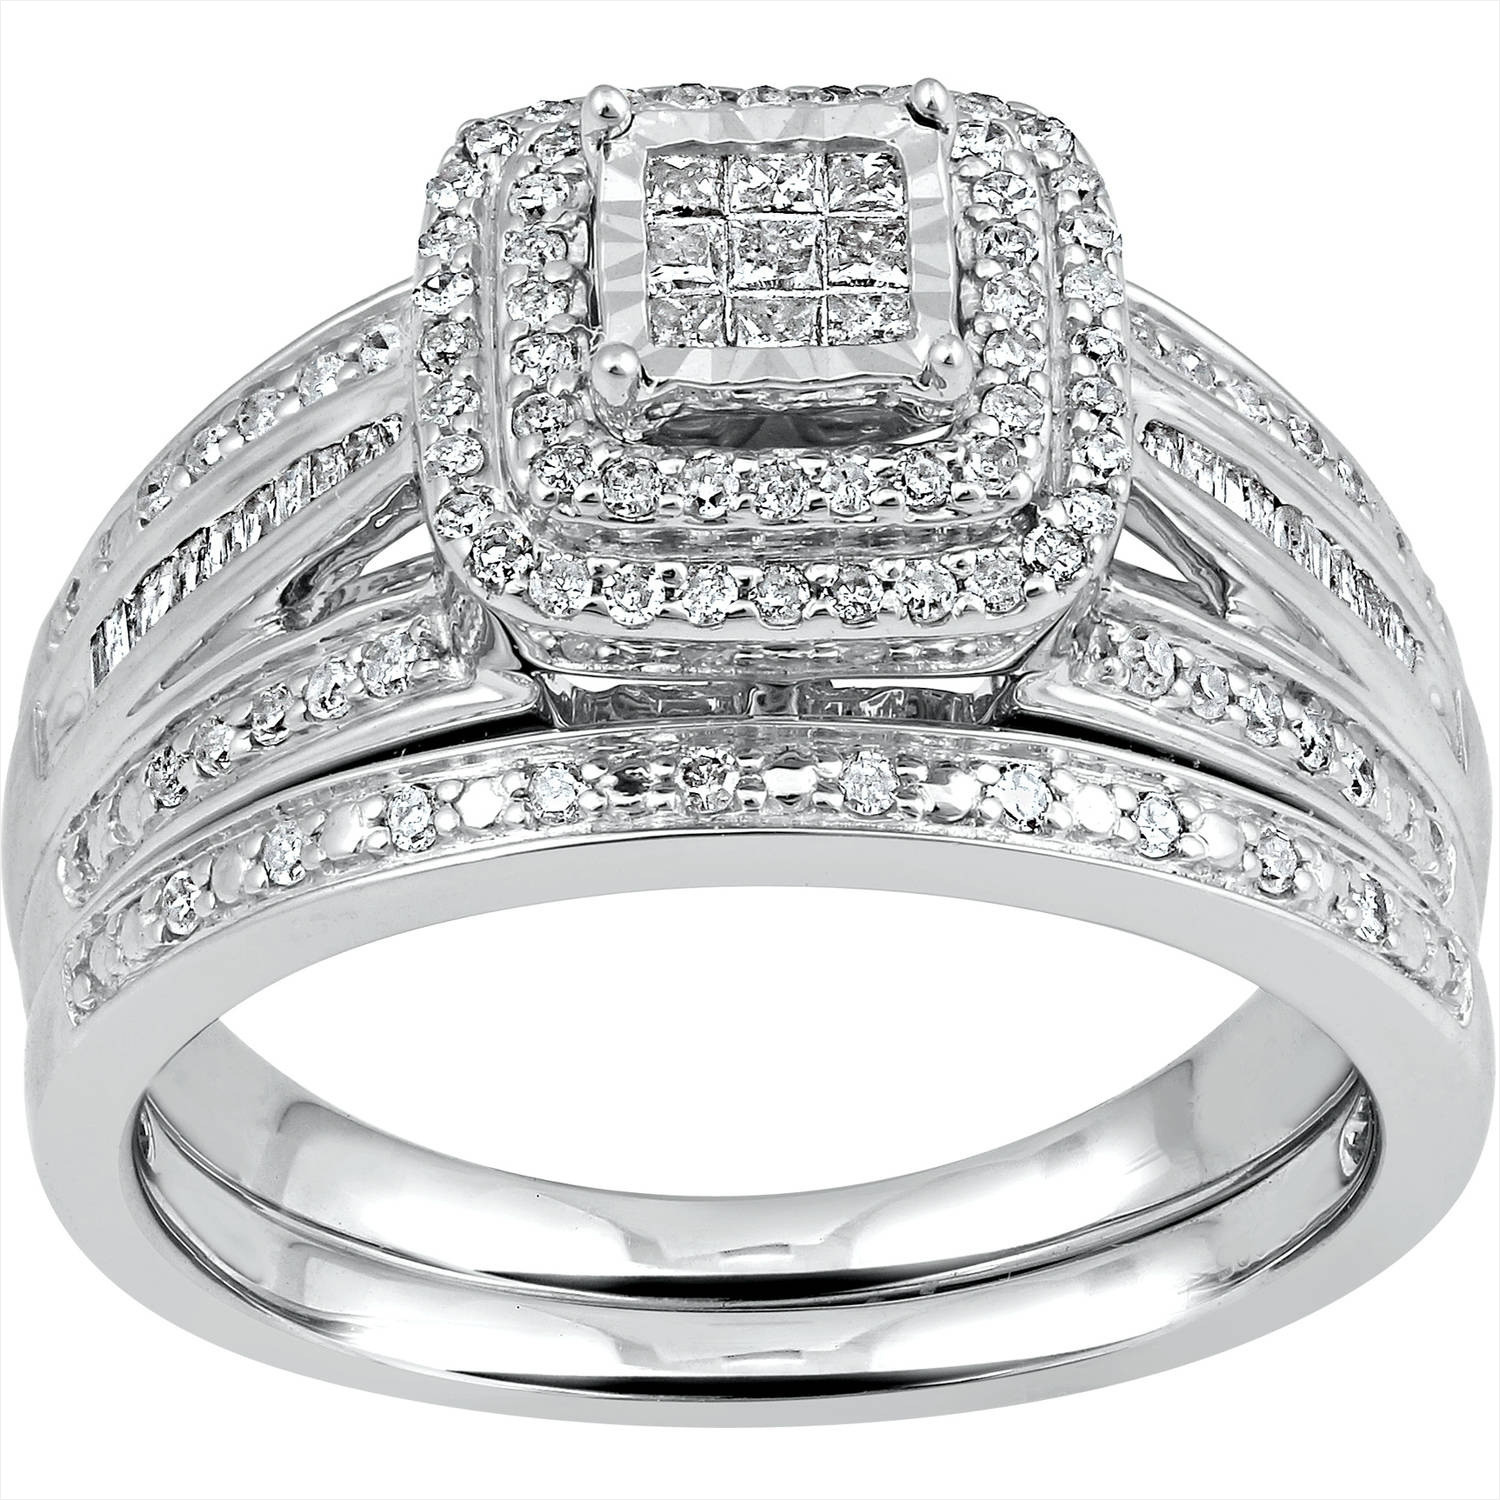 Walmart His And Hers Wedding Rings
 66 Expert His and Hers Wedding Ring Sets Walmart Ke